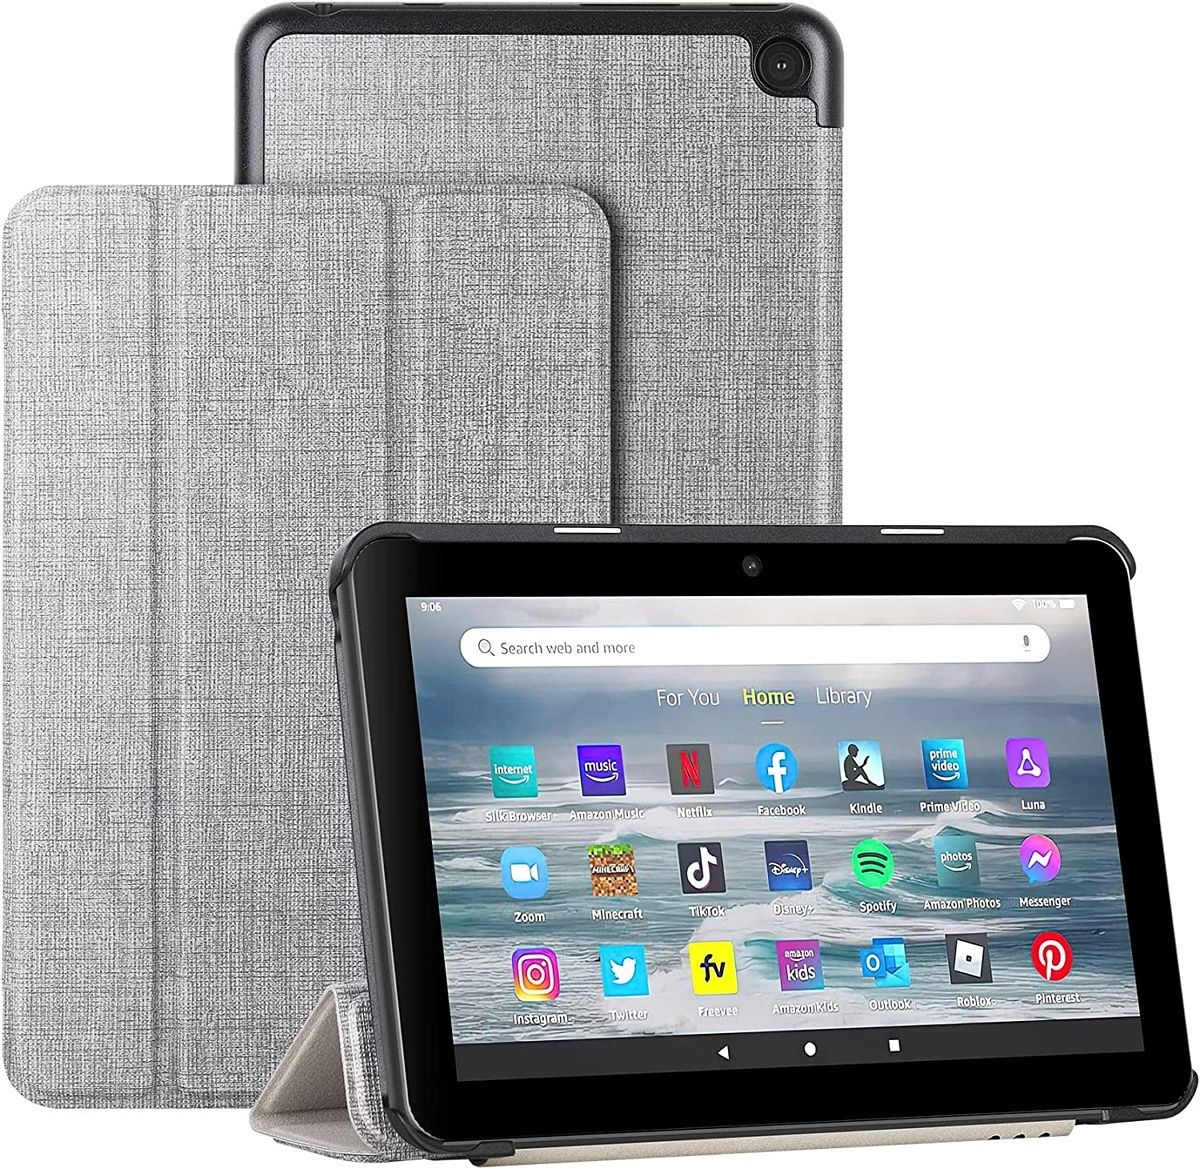 Tri-fold folio case provides full body protection against drops, scratches and stains.  Magnetic latches keep the front cover firmly in place while adding an auto wake/sleep feature.  The Trifold Stand lets you prop your Fire 7 up from multiple angles for a comfortable viewing and typing experience.